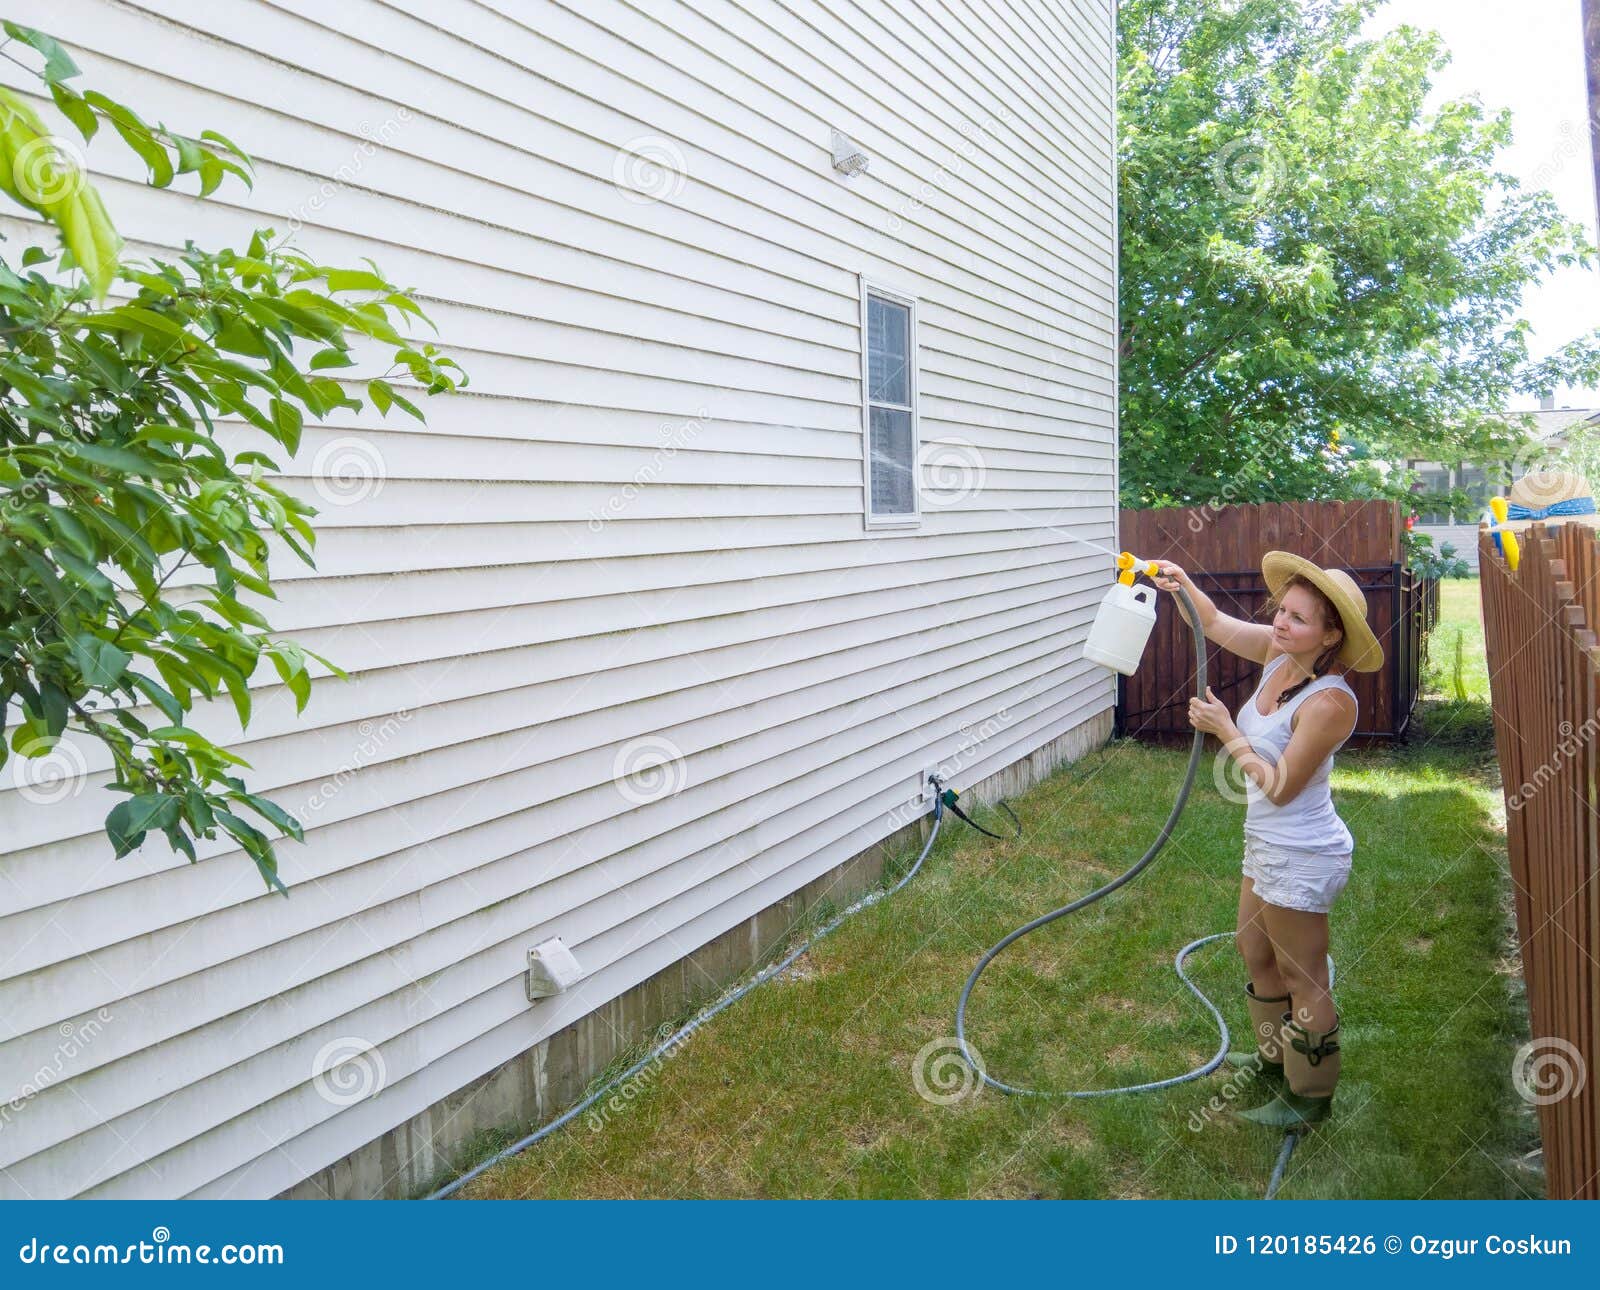 capable fit woman spraying down house sidings